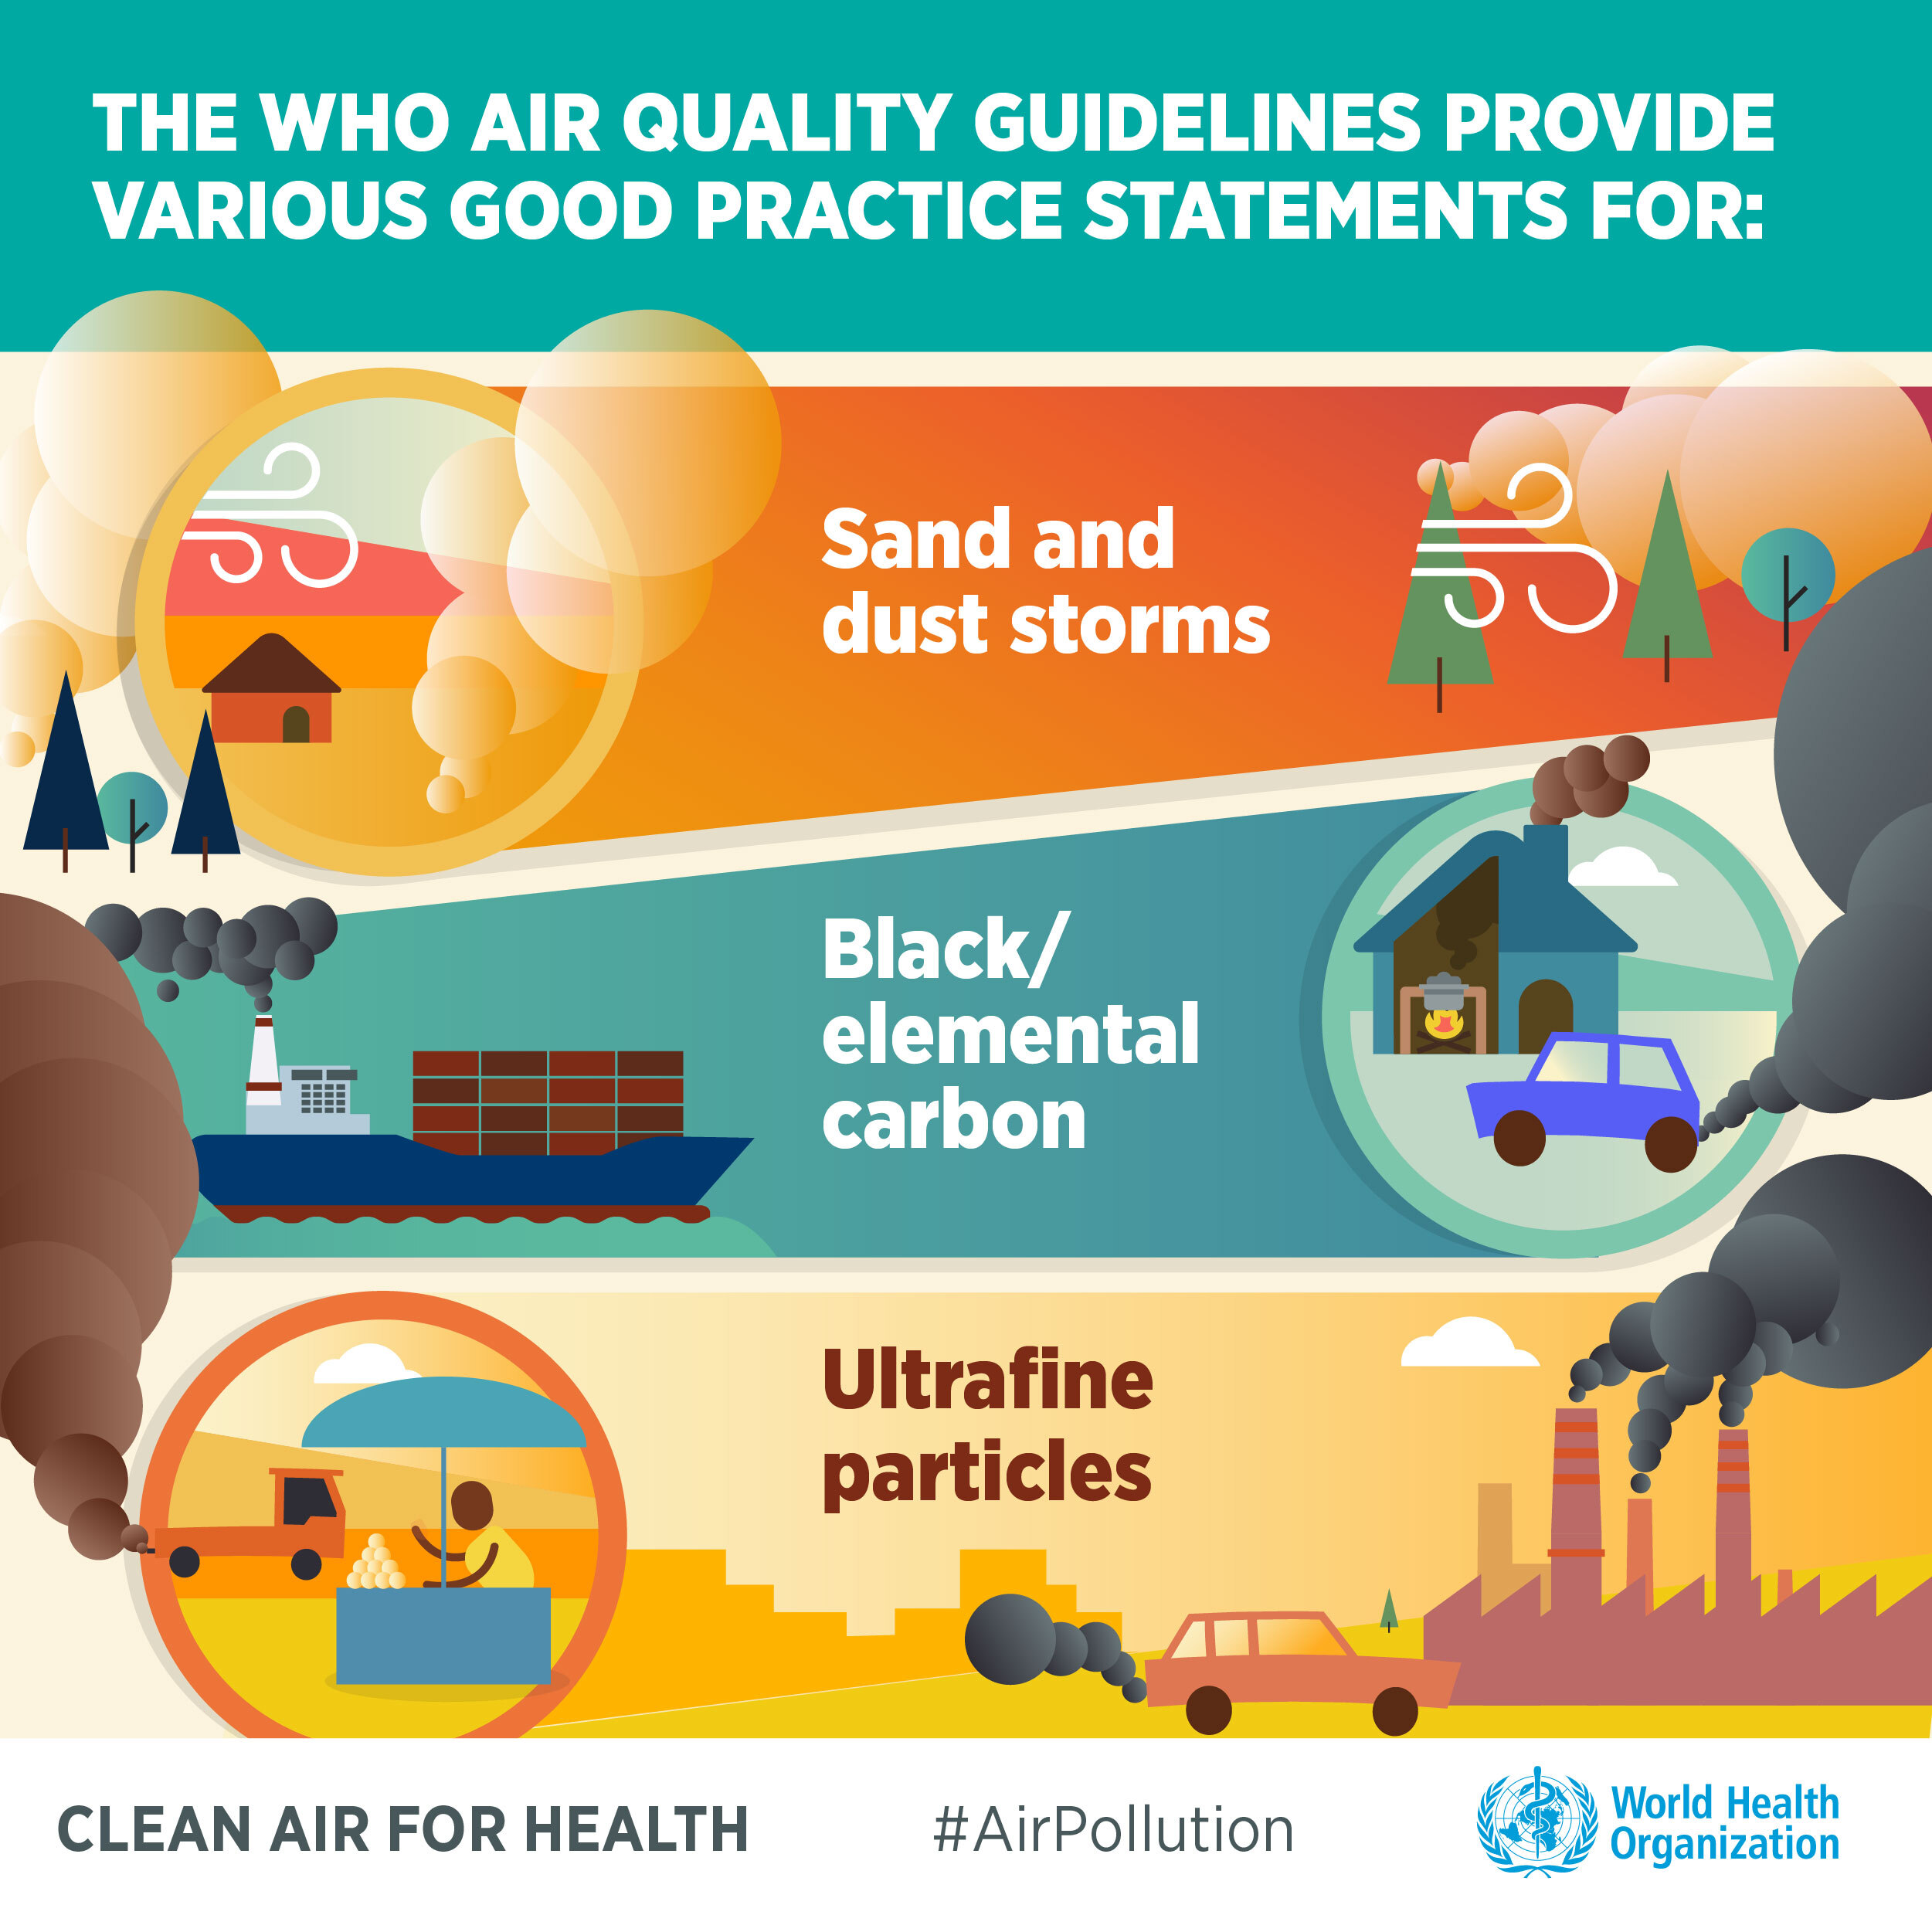 Meeting Global Air Quality Guidelines Could Prevent 2.1 Million